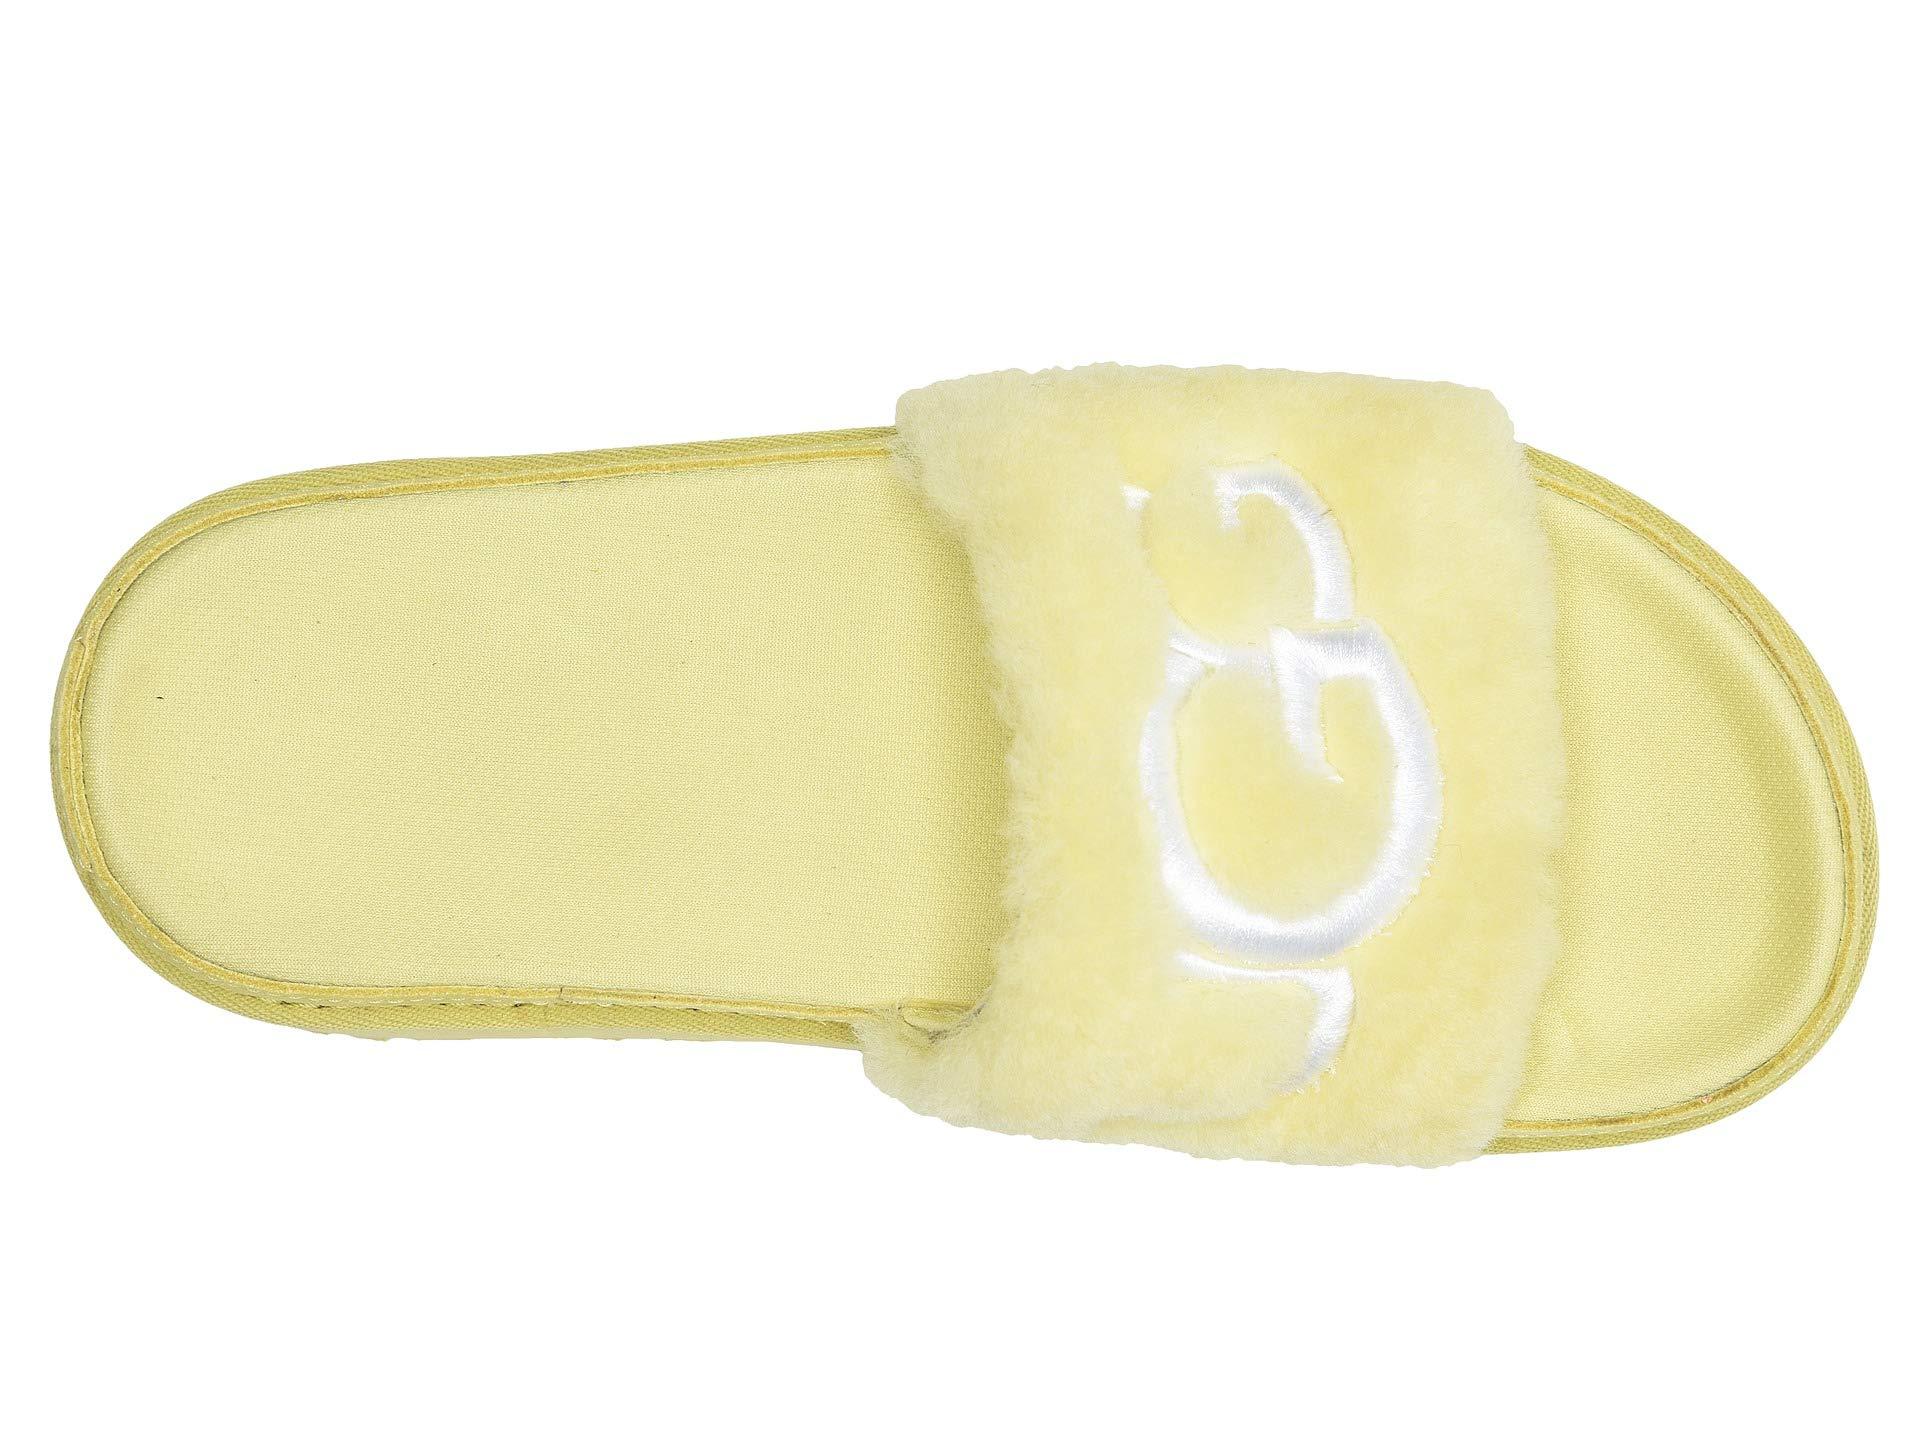 UGG Laton Fur Slide in Lime/Lime (Yellow) - Save 41% | Lyst